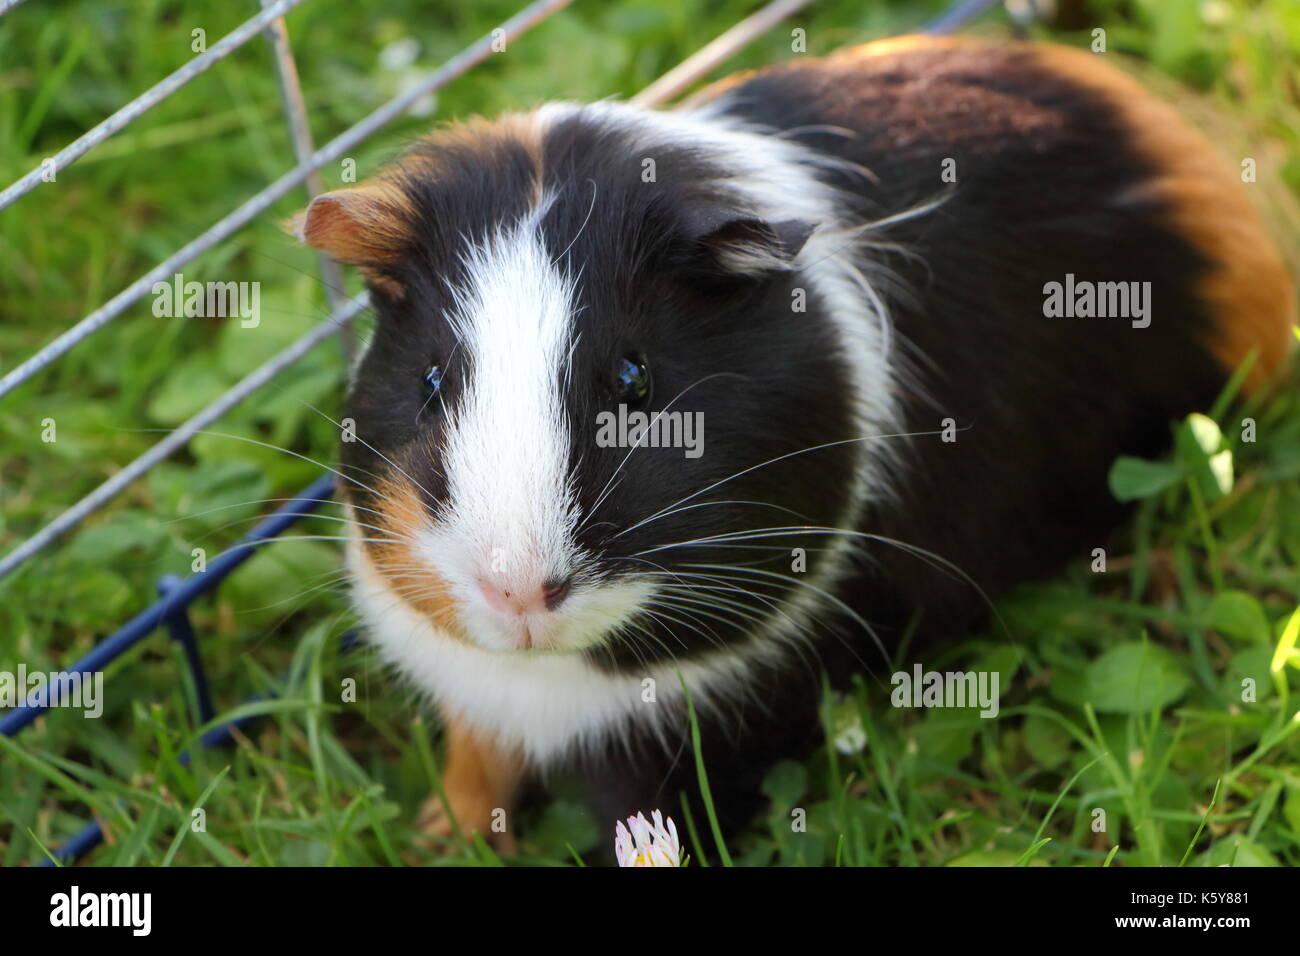 Guinea pig in grass under a wire fencing in a garden Stock Photo